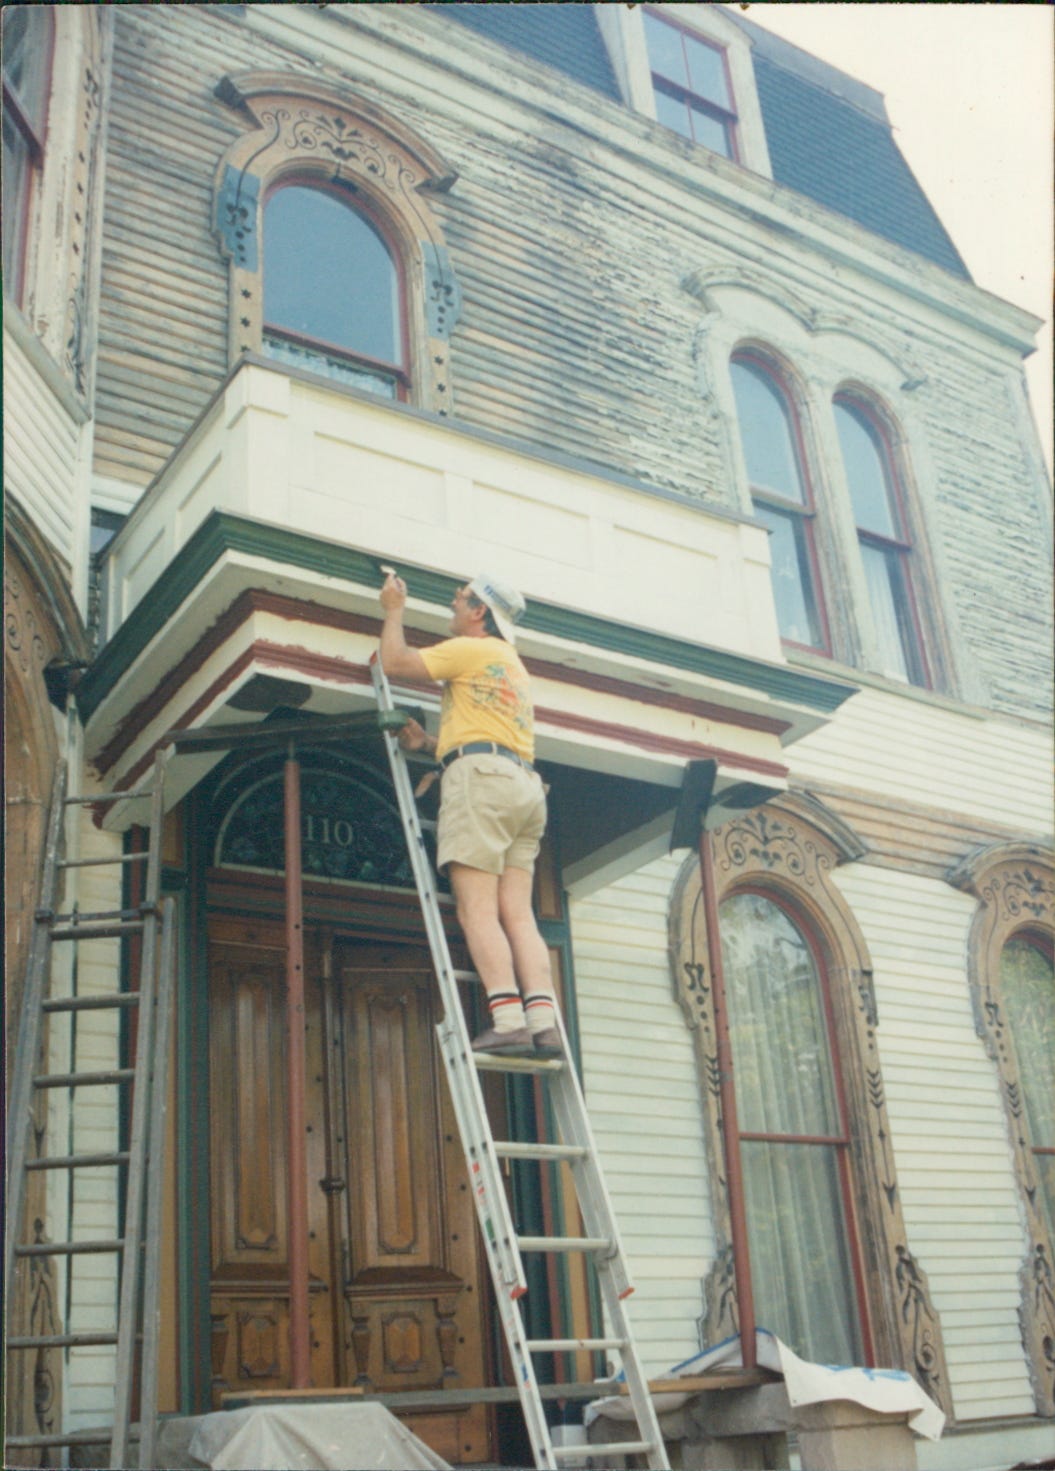 Man on ladder painting the trim on front entrance of old Victorian house. He is wearing a yellow shirt, kahki shorts, and tube socks. The paint is dark green.